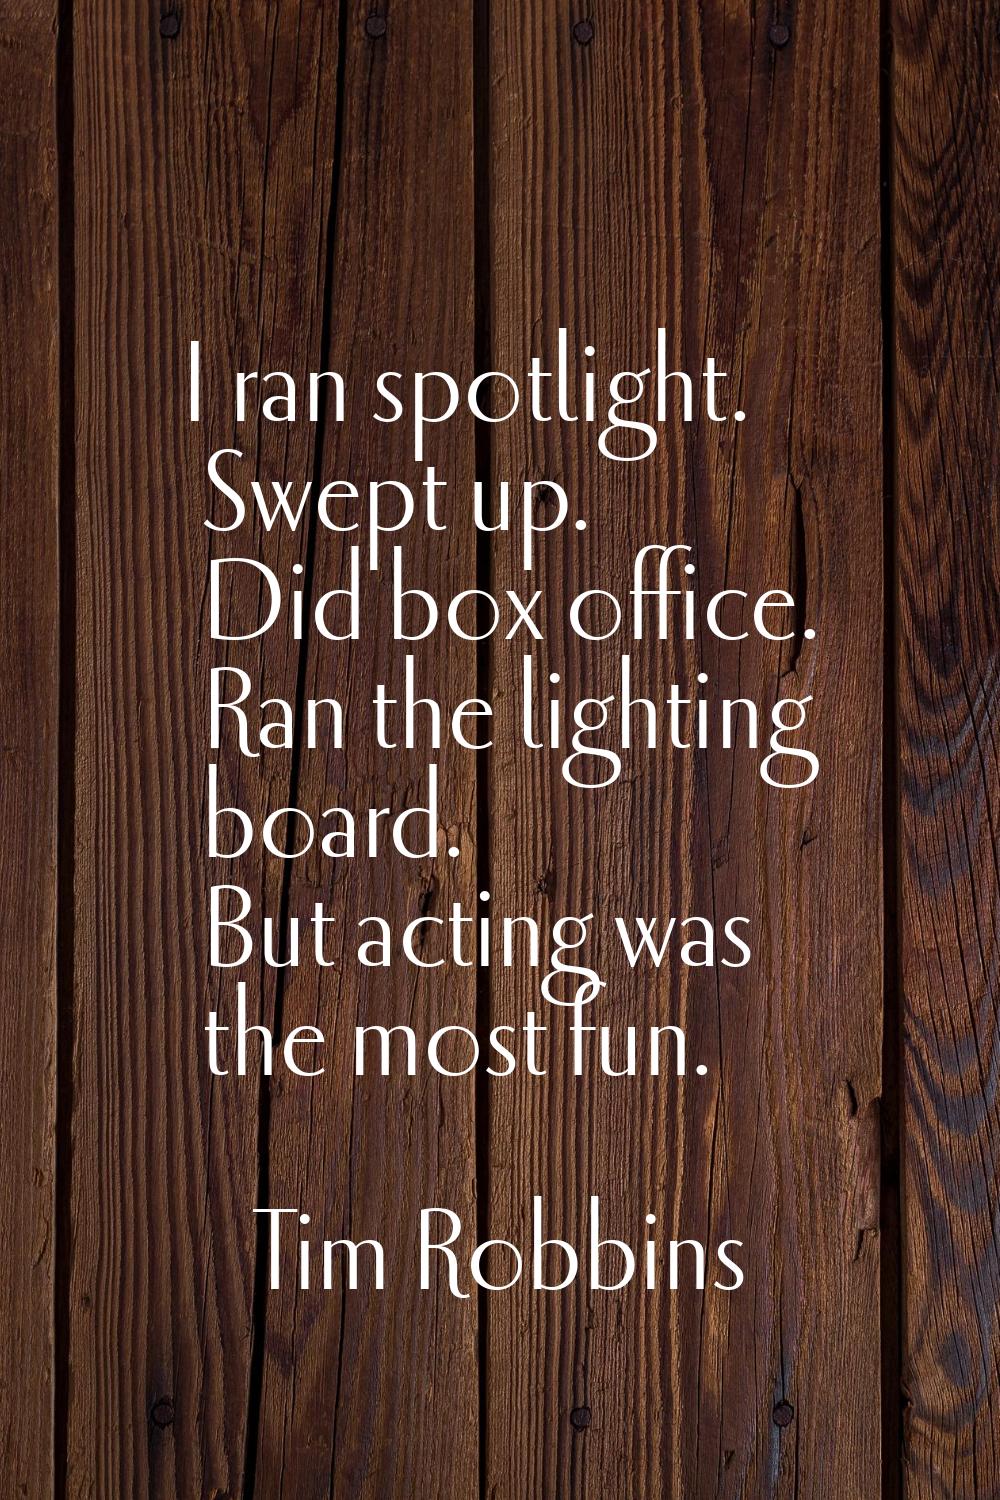 I ran spotlight. Swept up. Did box office. Ran the lighting board. But acting was the most fun.